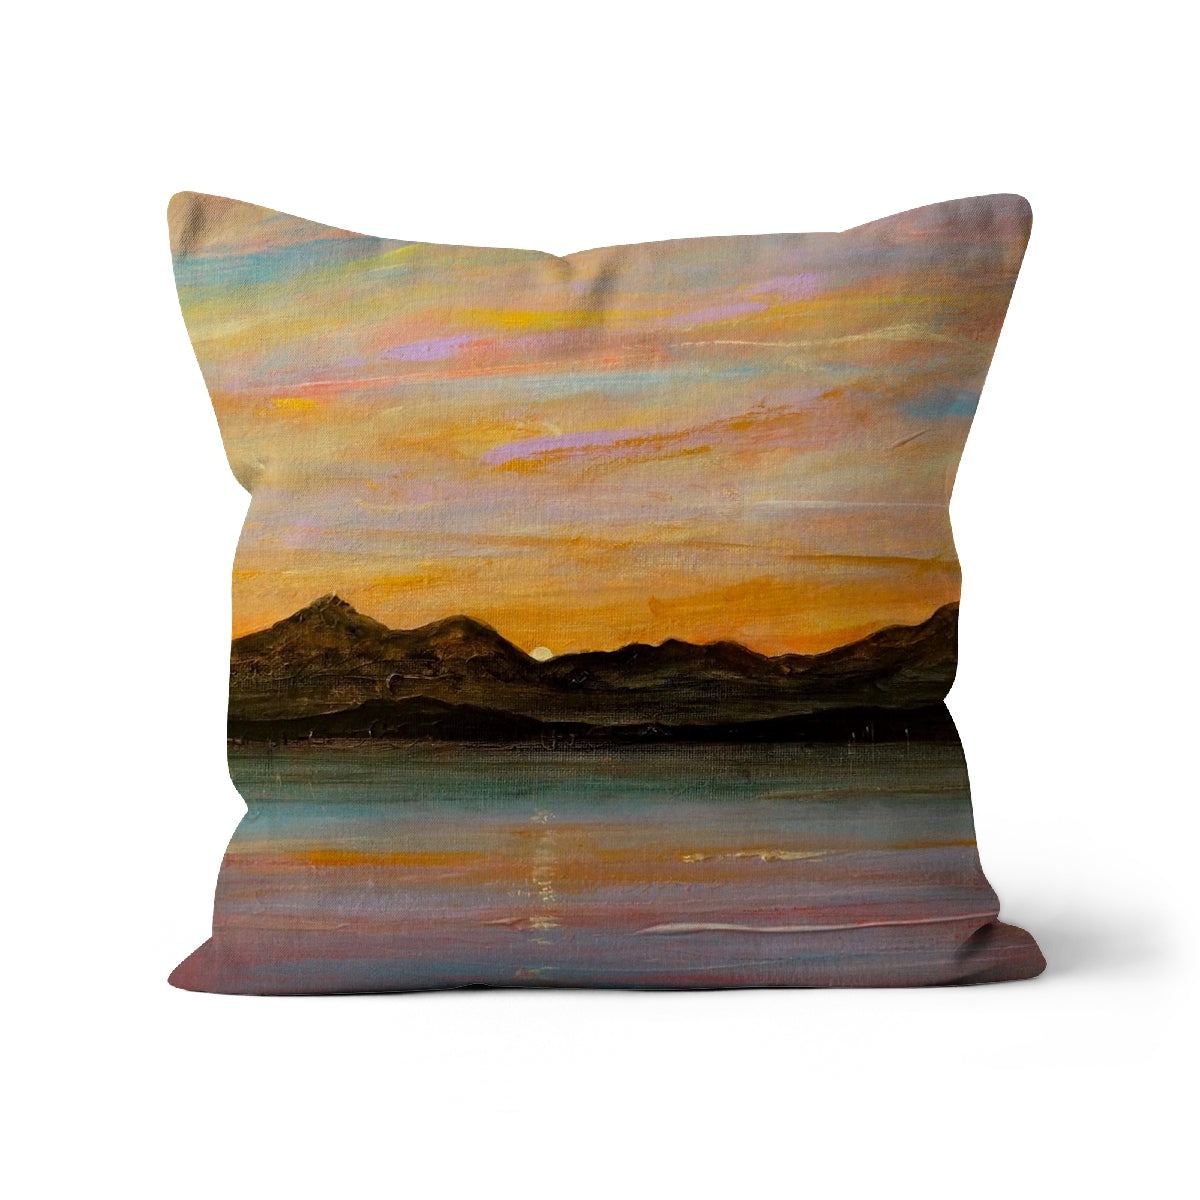 The Sleeping Warrior Arran Art Gifts Cushion-Cushions-Arran Art Gallery-Faux Suede-16"x16"-Paintings, Prints, Homeware, Art Gifts From Scotland By Scottish Artist Kevin Hunter